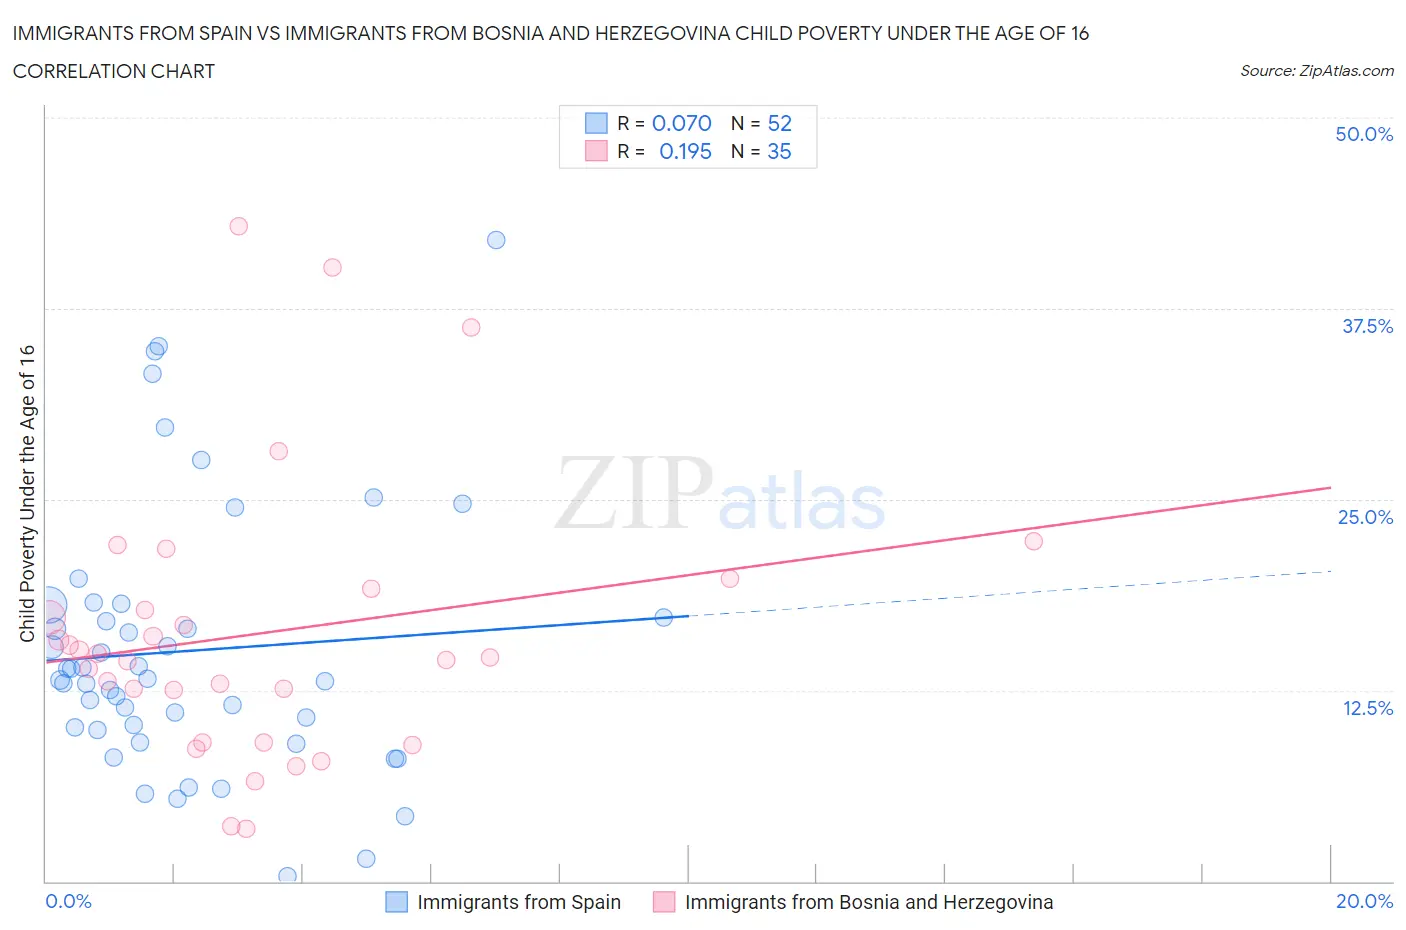 Immigrants from Spain vs Immigrants from Bosnia and Herzegovina Child Poverty Under the Age of 16